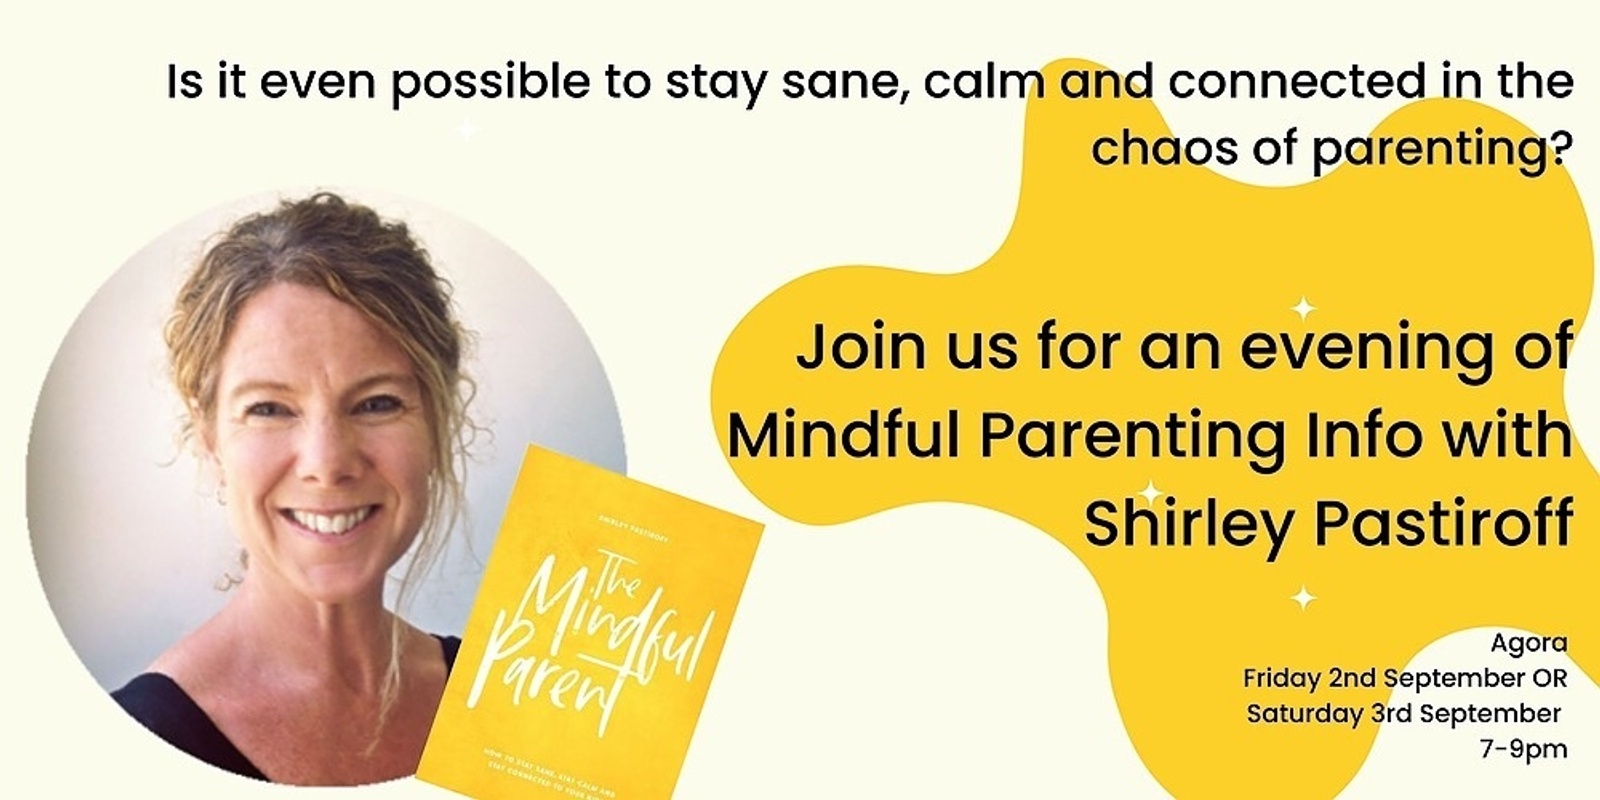 Banner image for Mindful Parenting Info night with Shirley Pastiroff.